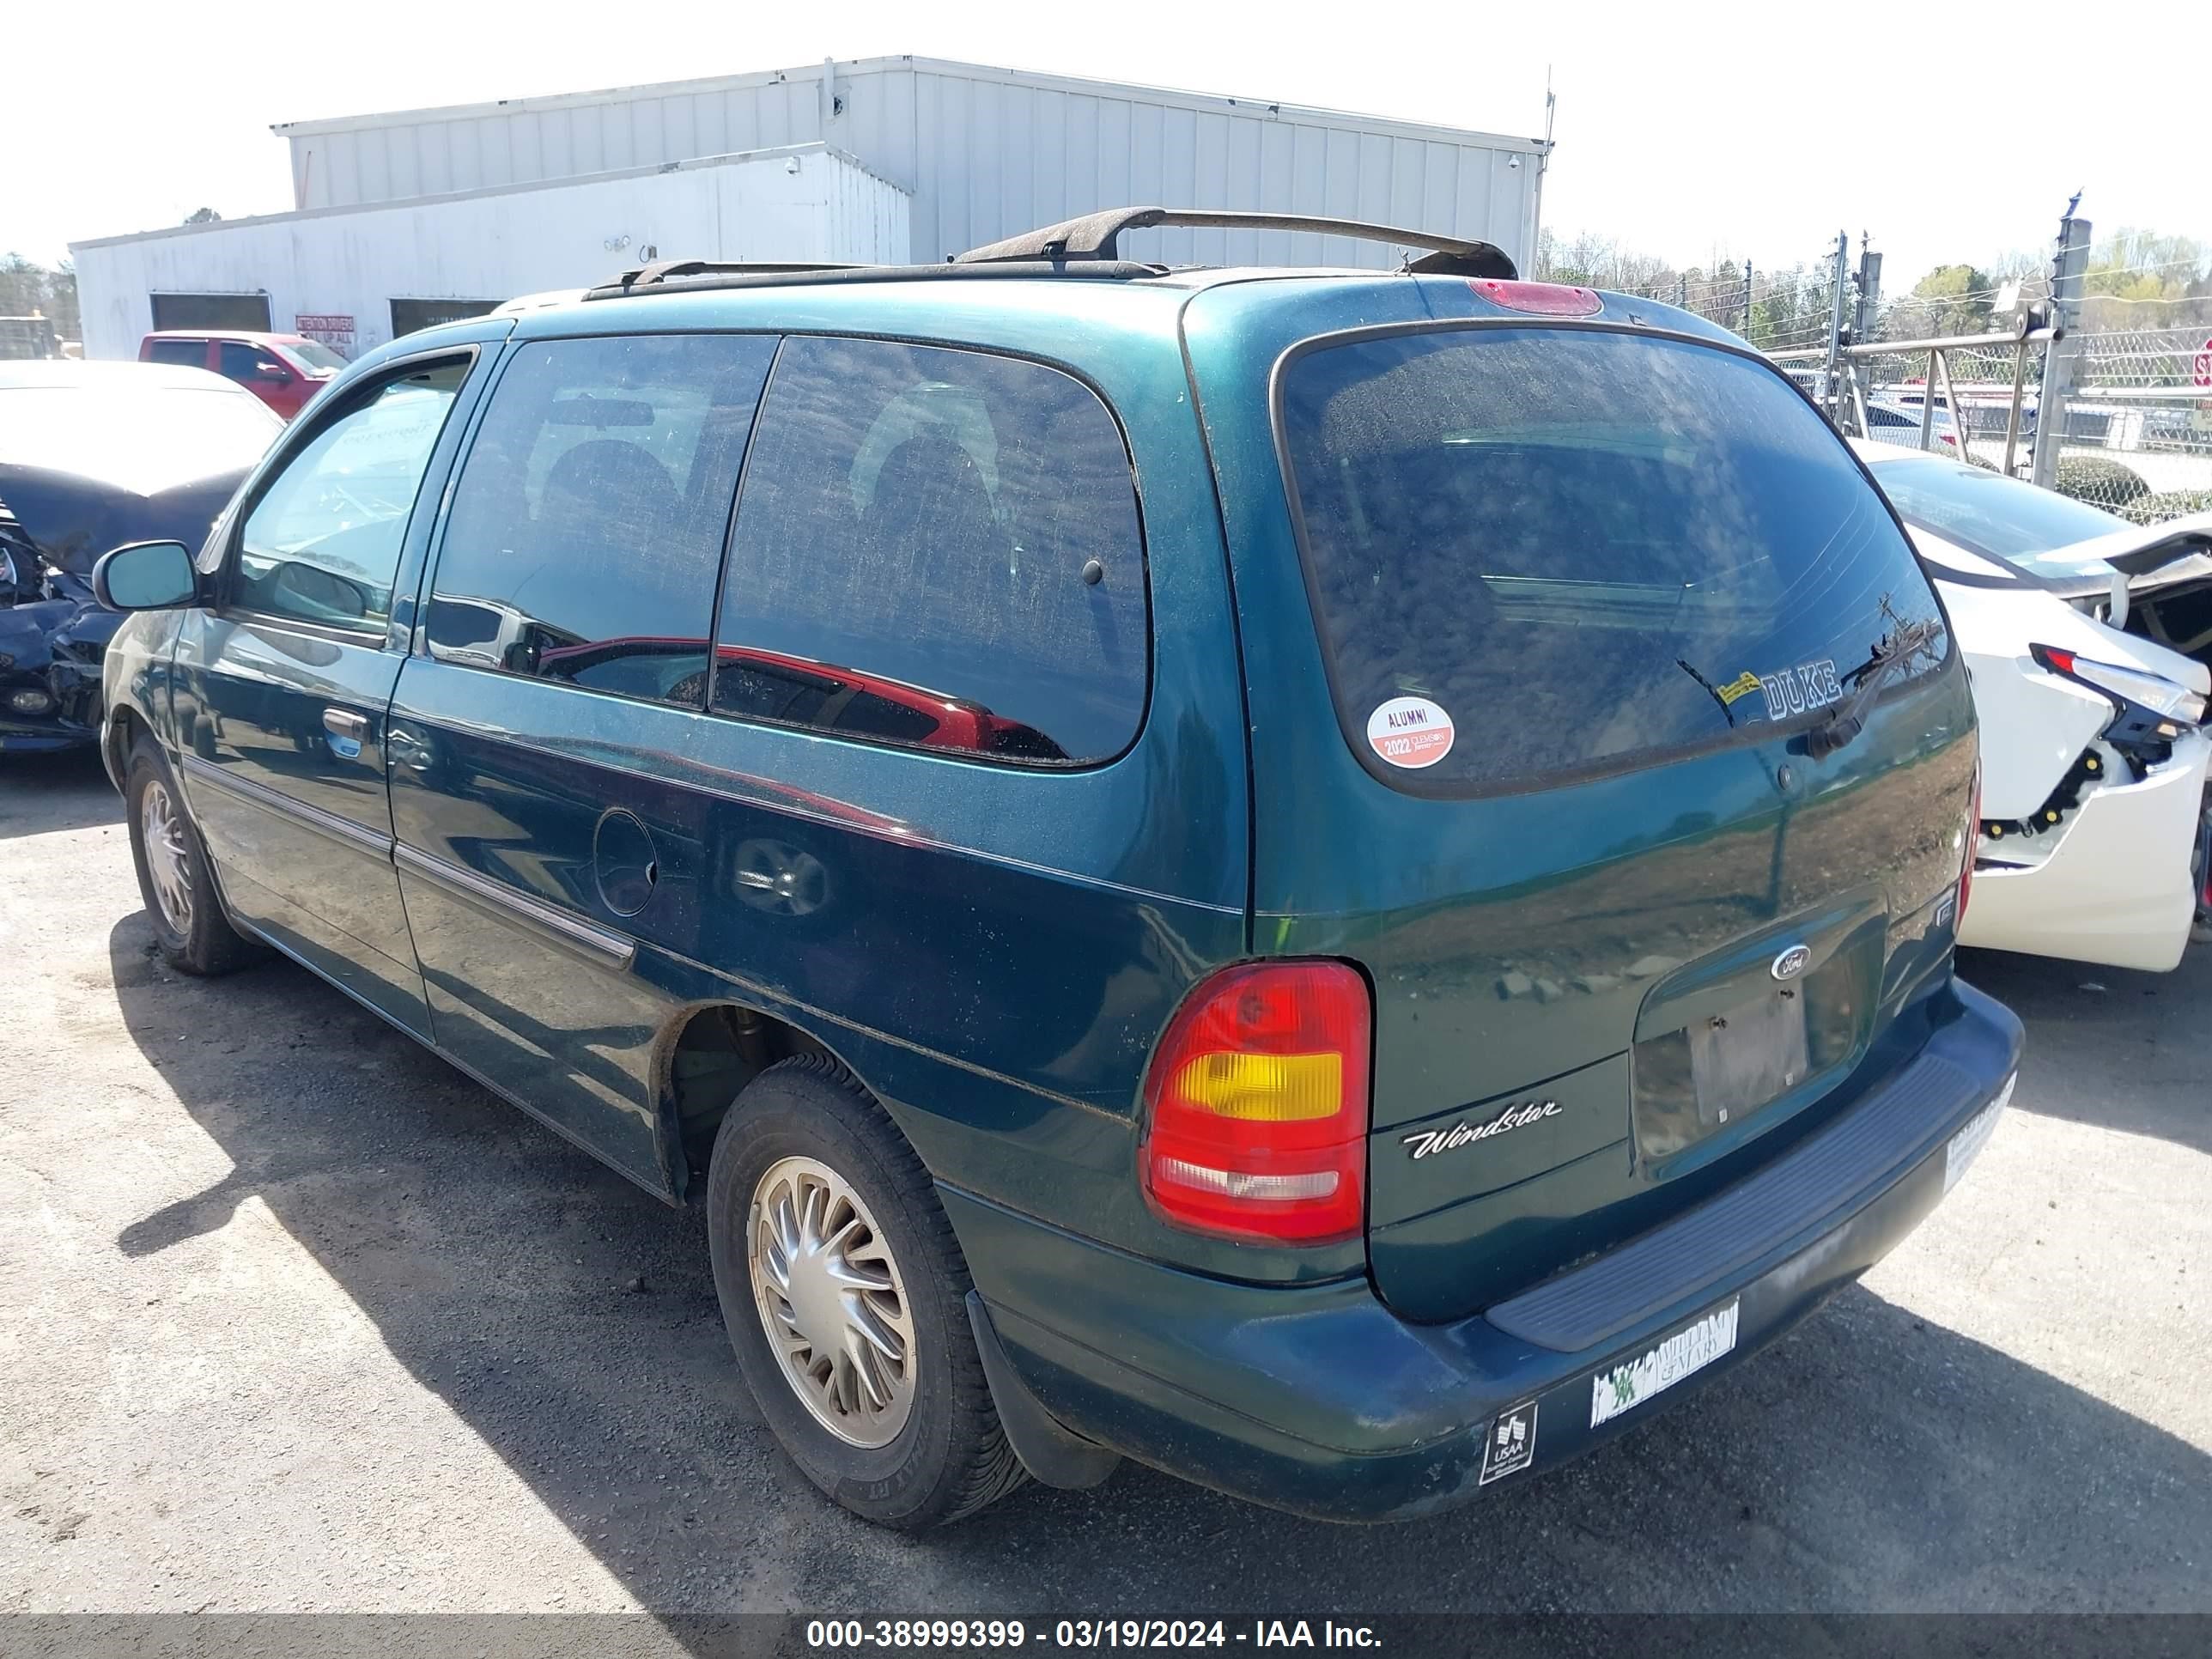 2FMZA5145WBE21153  - FORD WINDSTAR  1998 IMG - 2